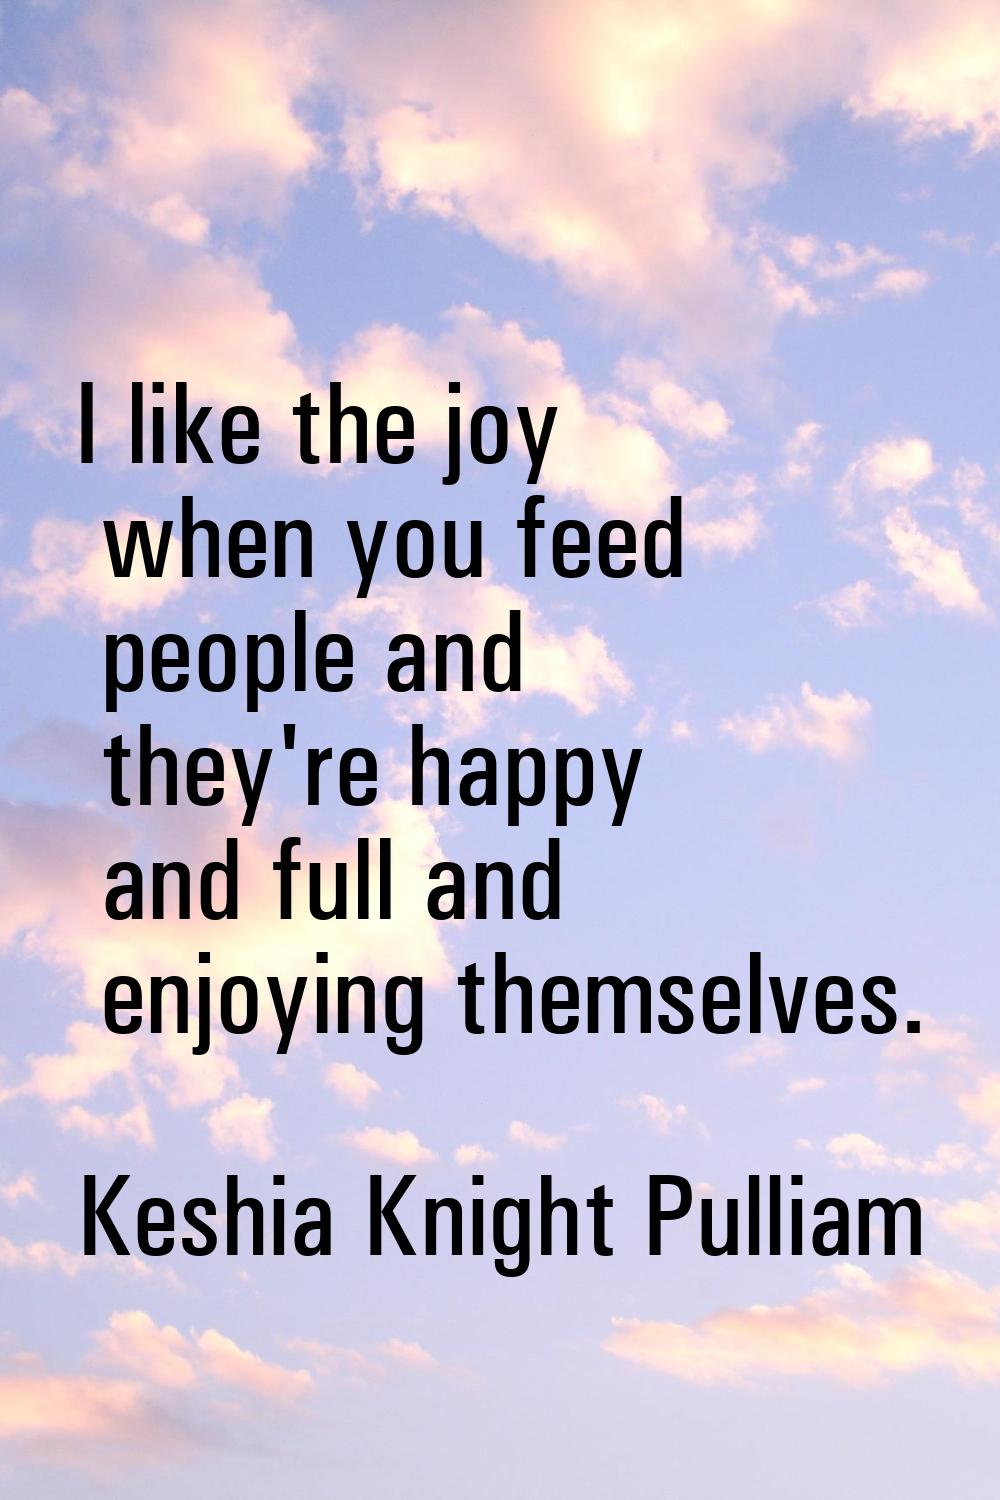 I like the joy when you feed people and they're happy and full and enjoying themselves.